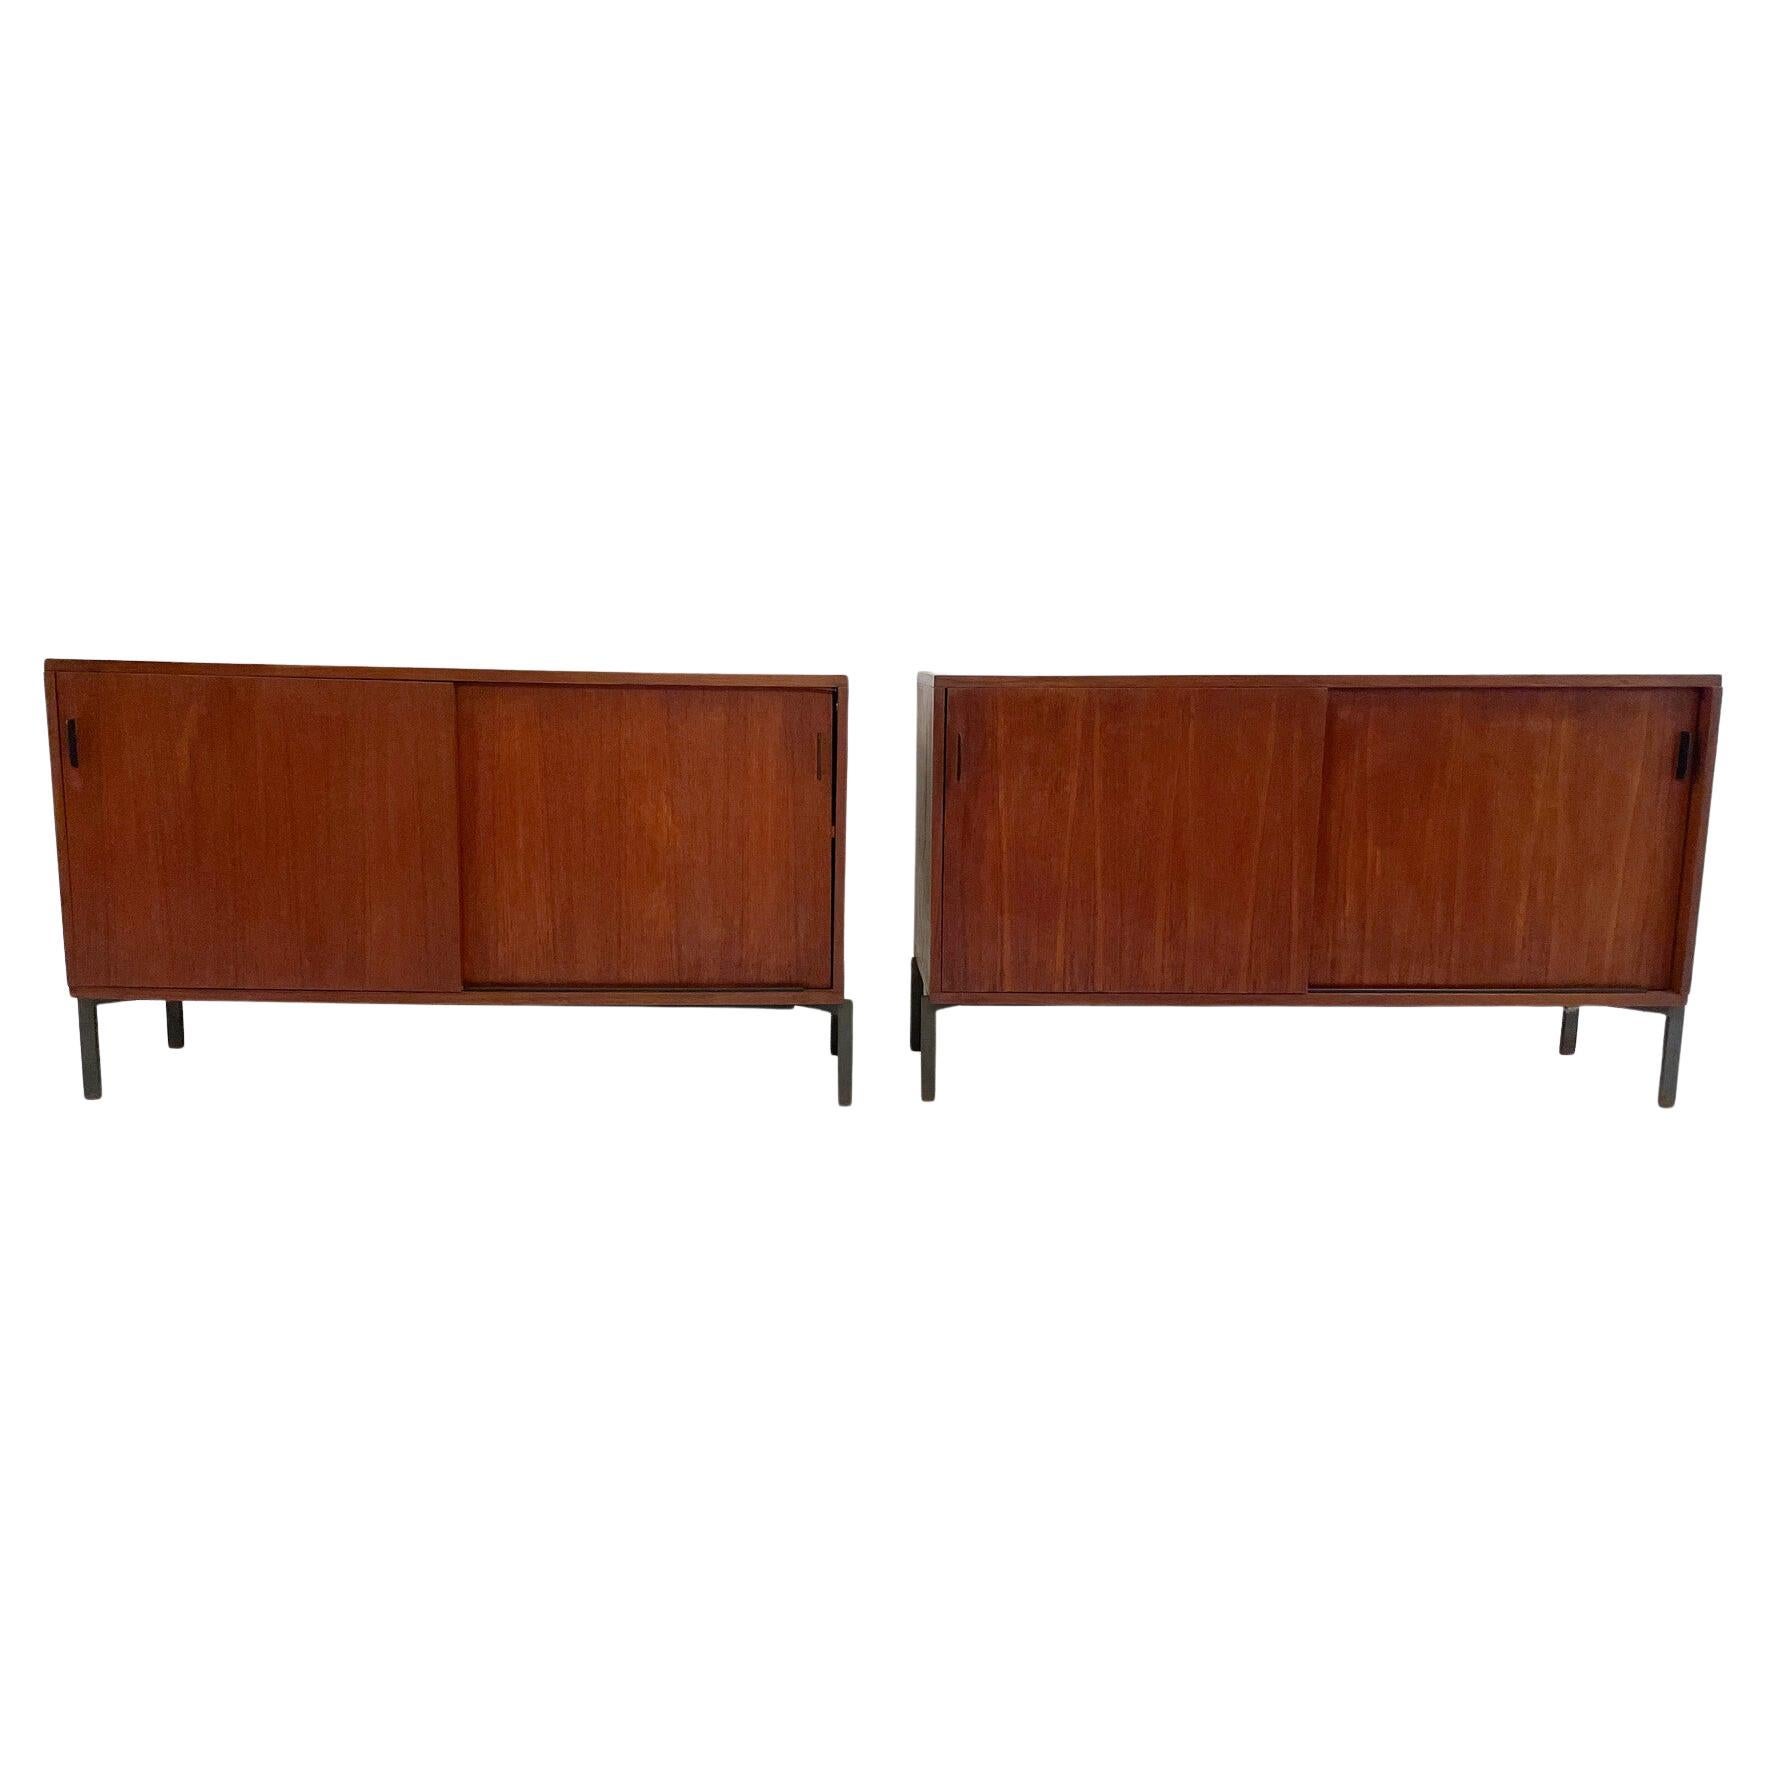 Mid-Century Modern Sideboard, Wood, Germany, 1960s - 2 Available For Sale